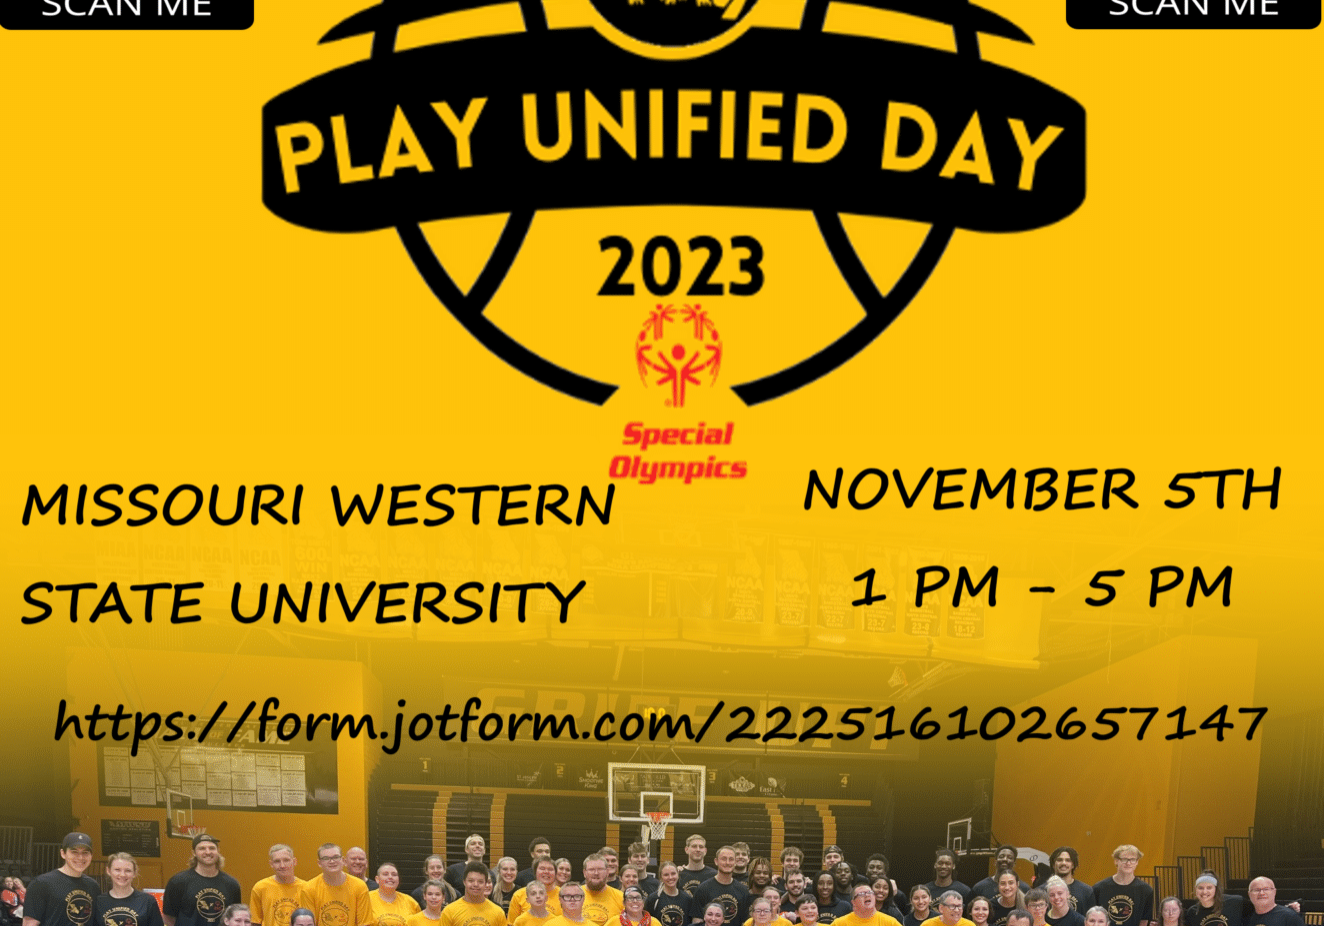 Play Unified Day 23